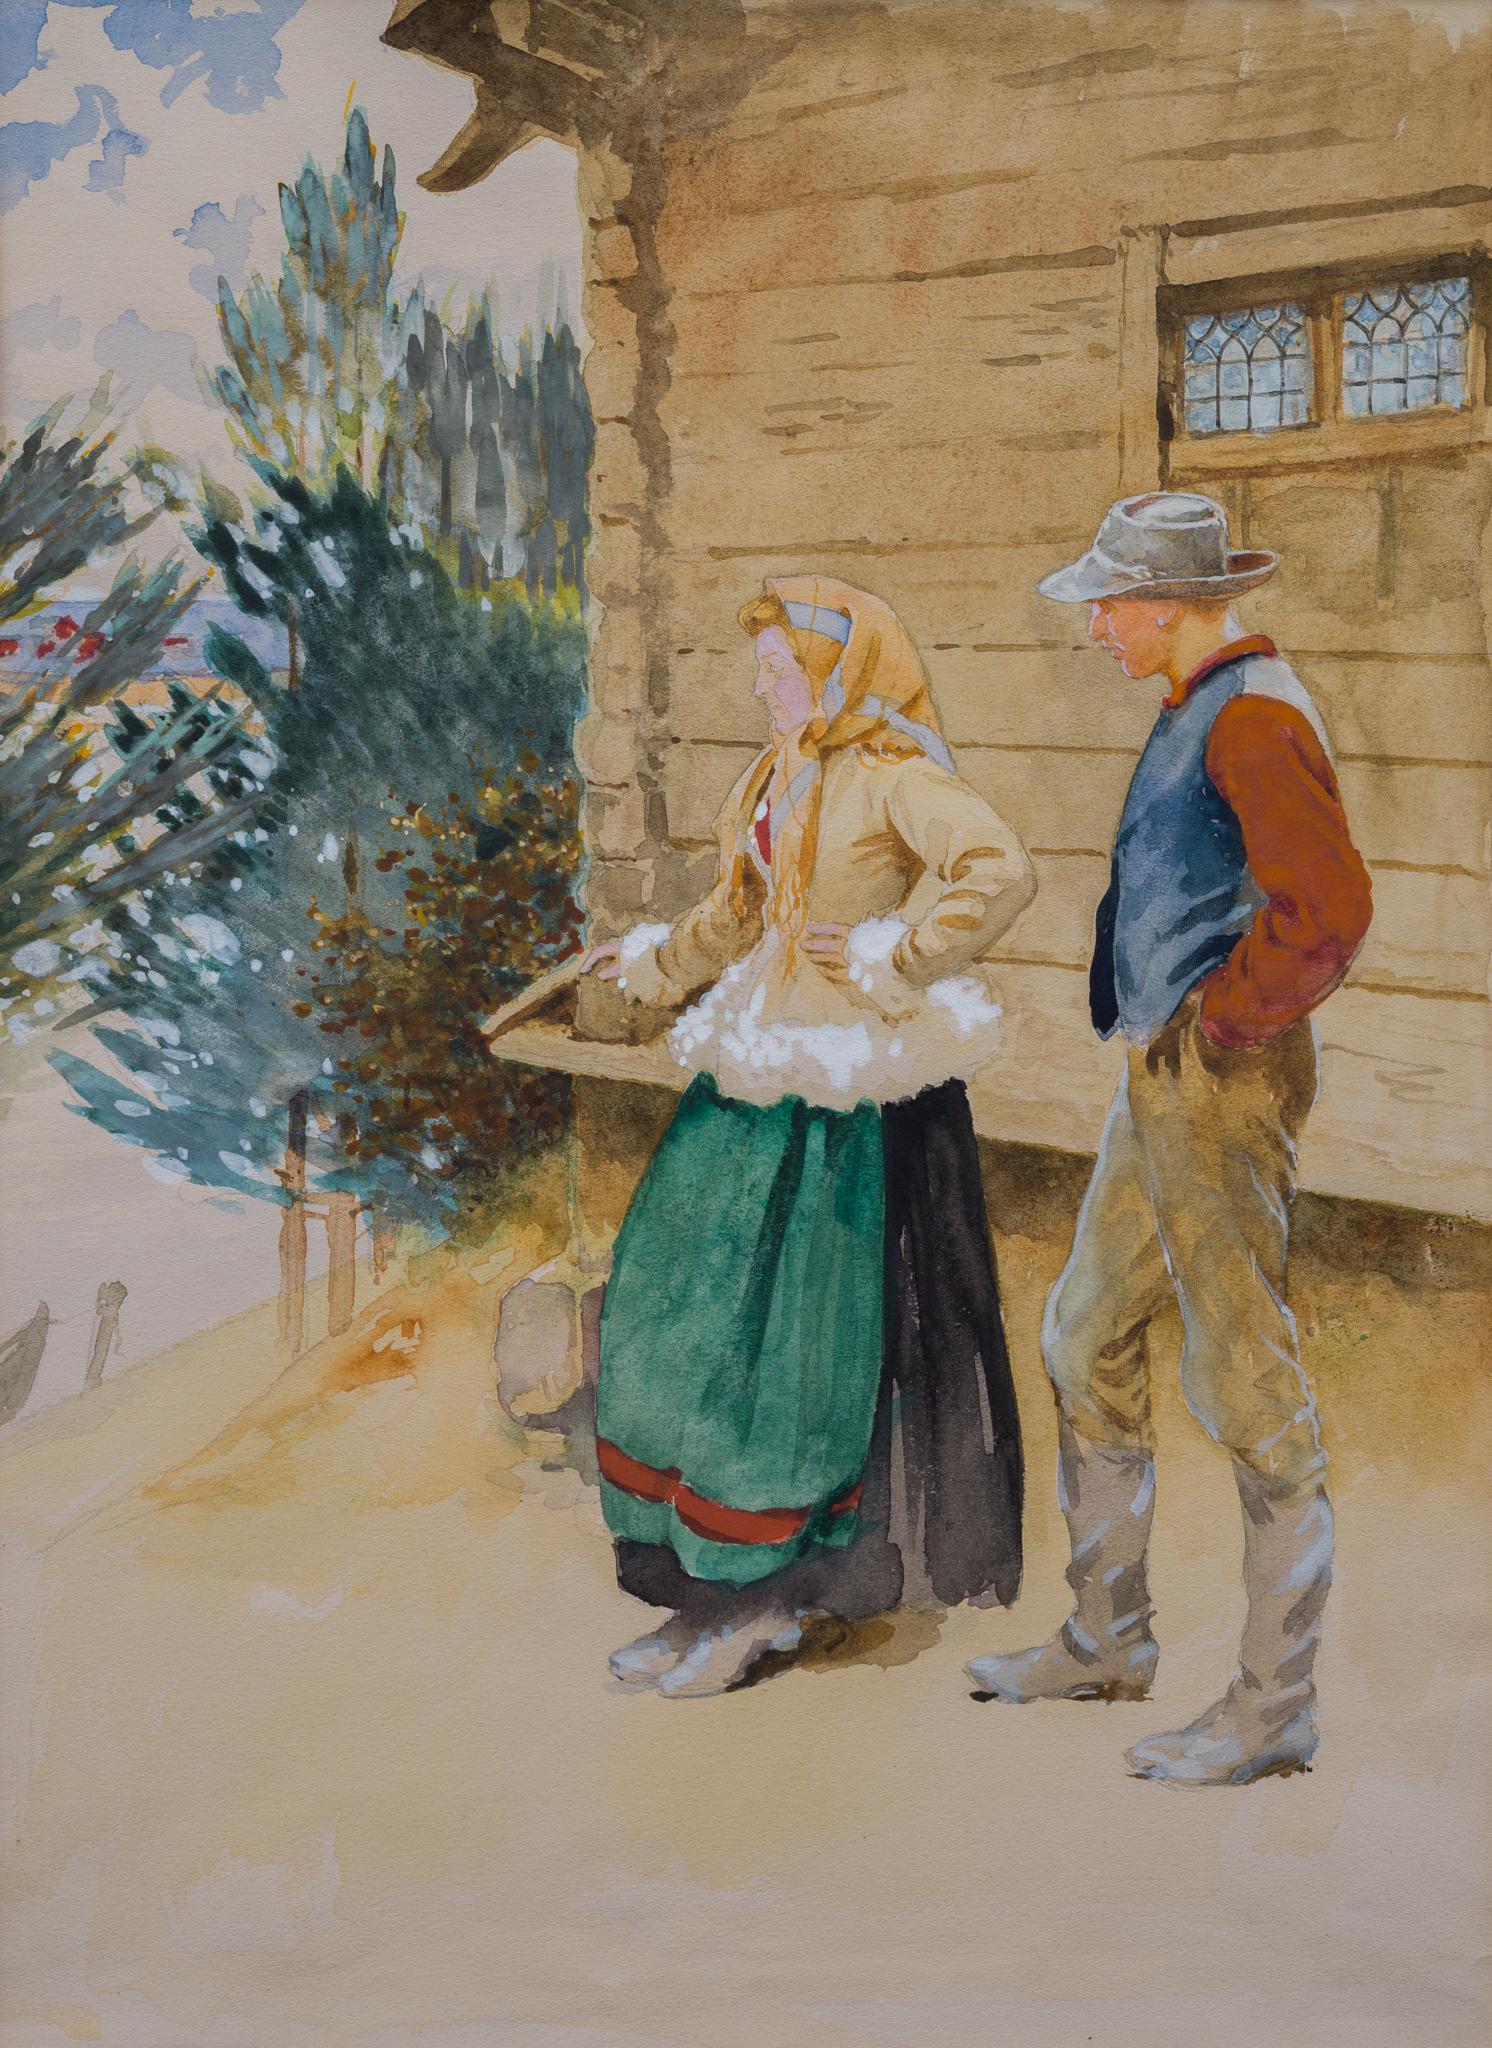 Quiet Contemplation: Rural Serenity in Hagborg's Watercolor - Art by August Hagborg